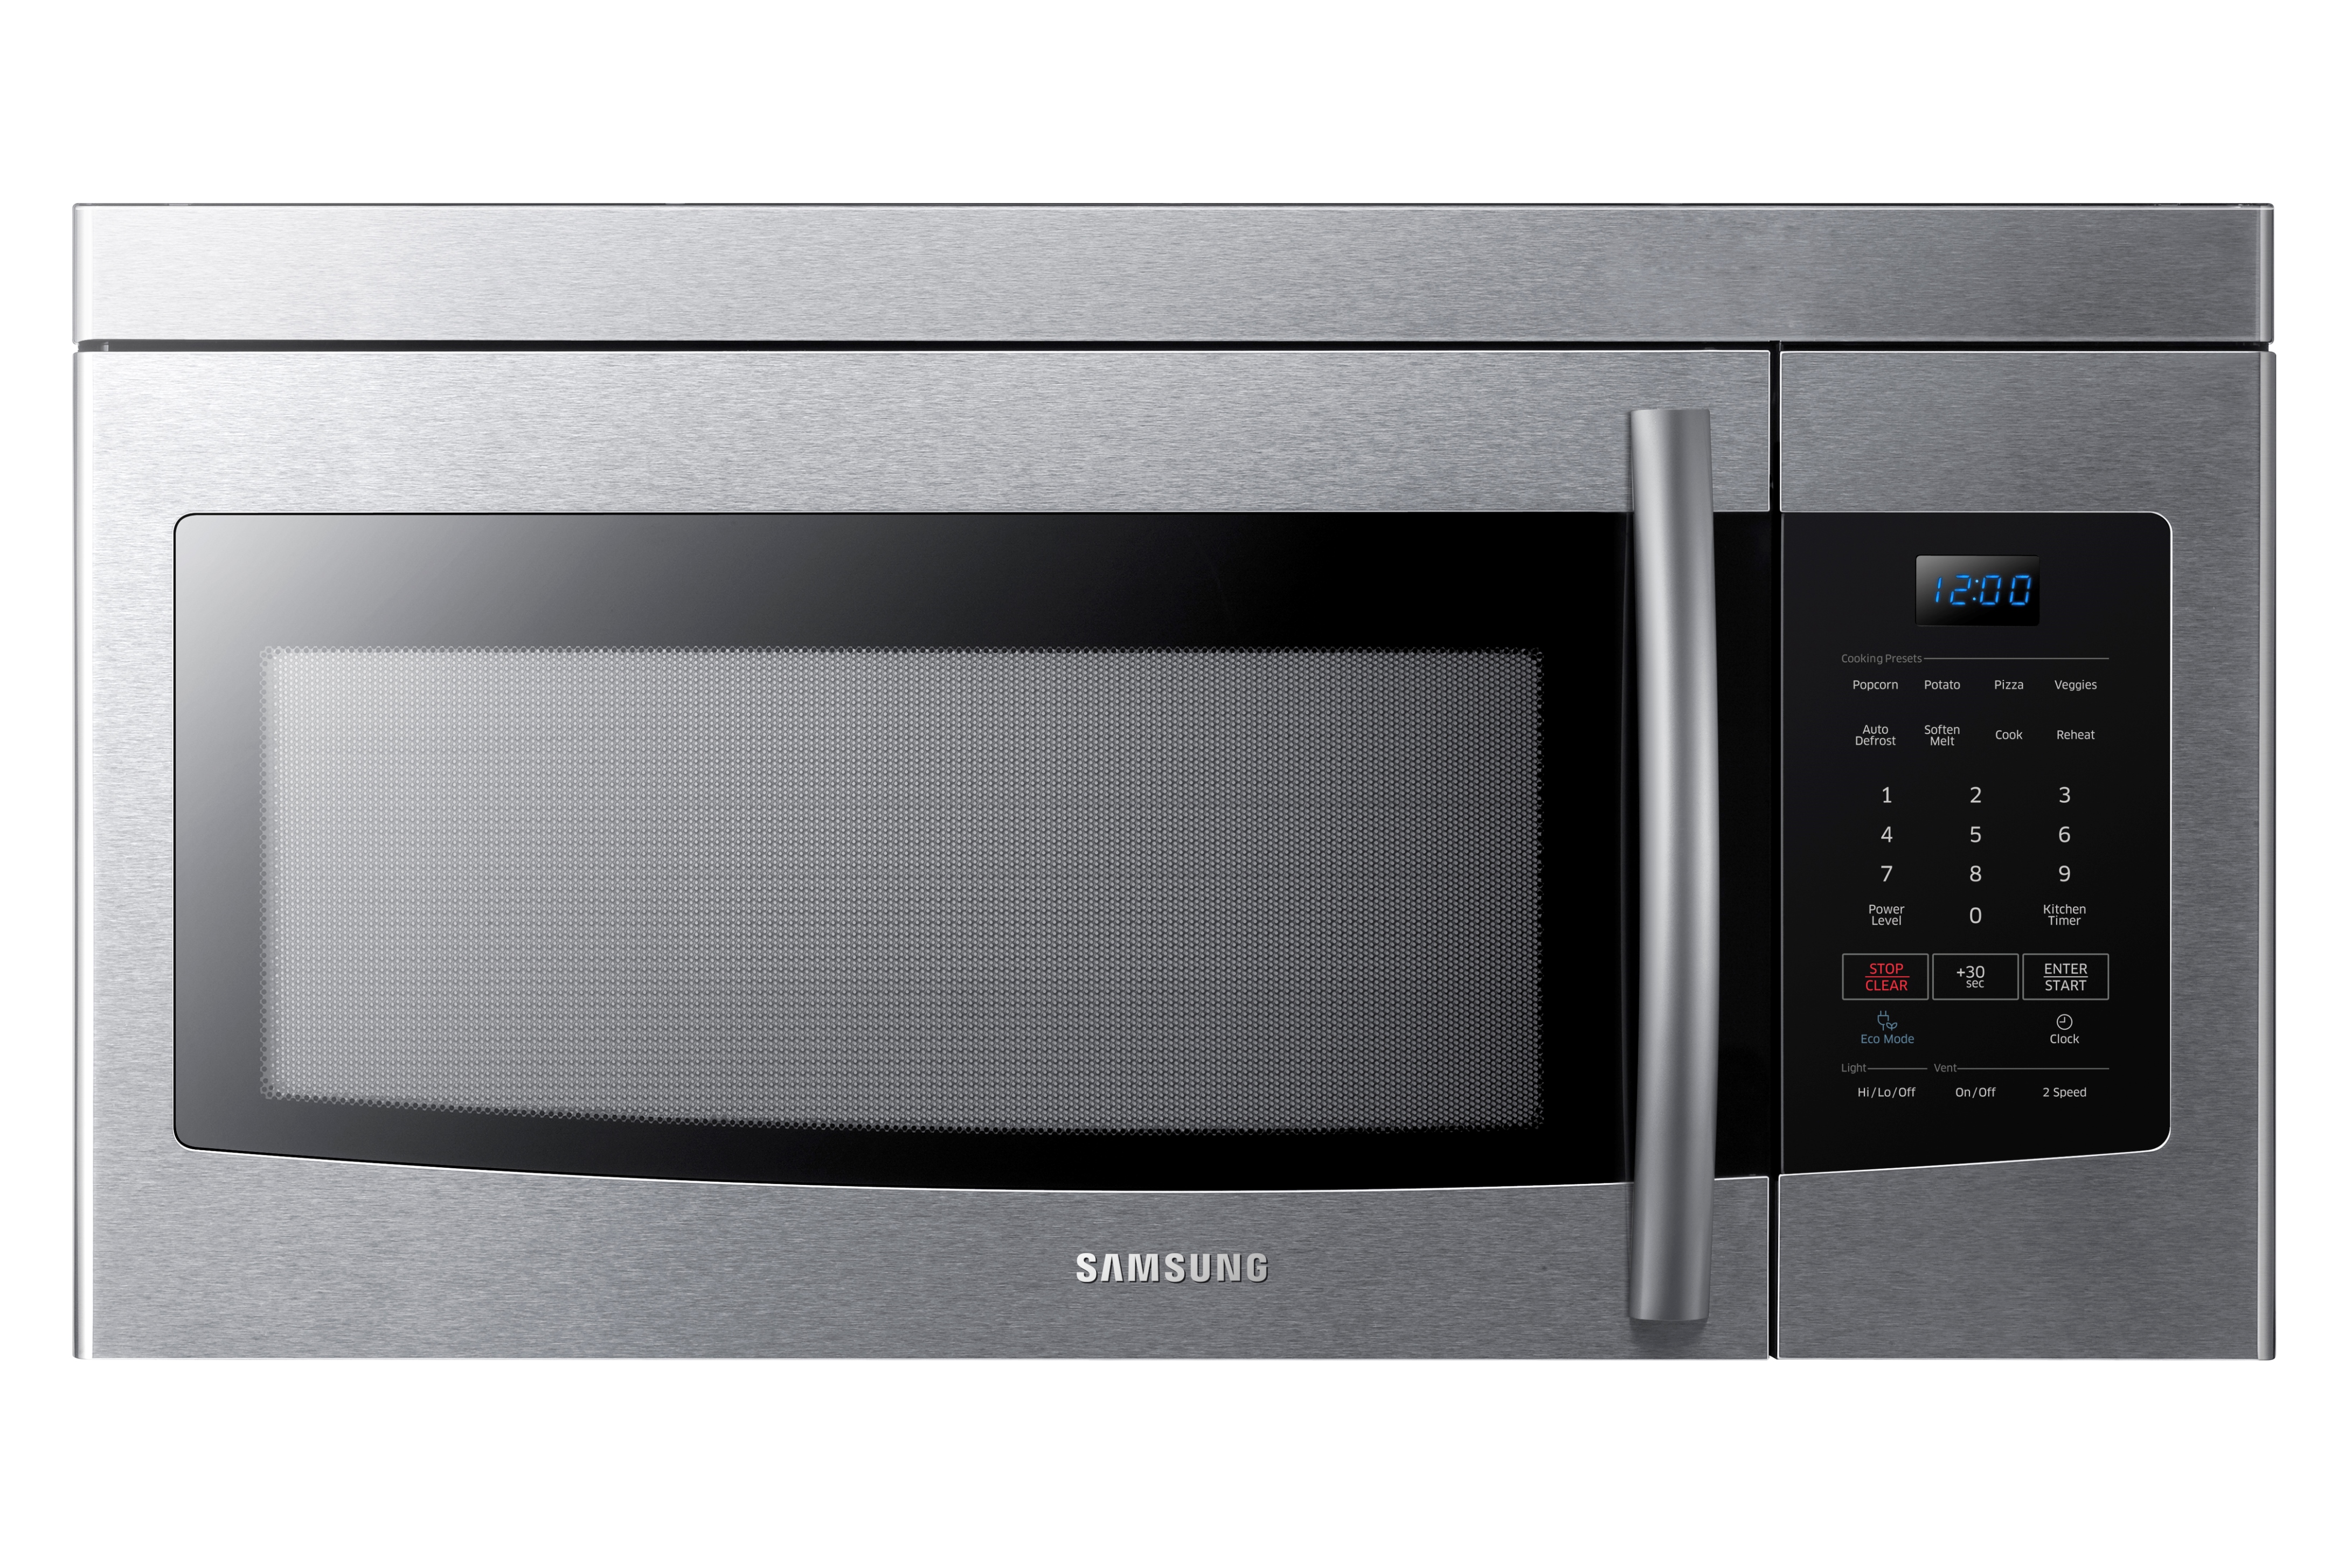 Samsung ME16K3000AS/AA 1.6 cu. ft. Over-the-Range Microwave - Stainless Samsung 1.6 Cu Ft Over The Range Microwave Stainless Steel